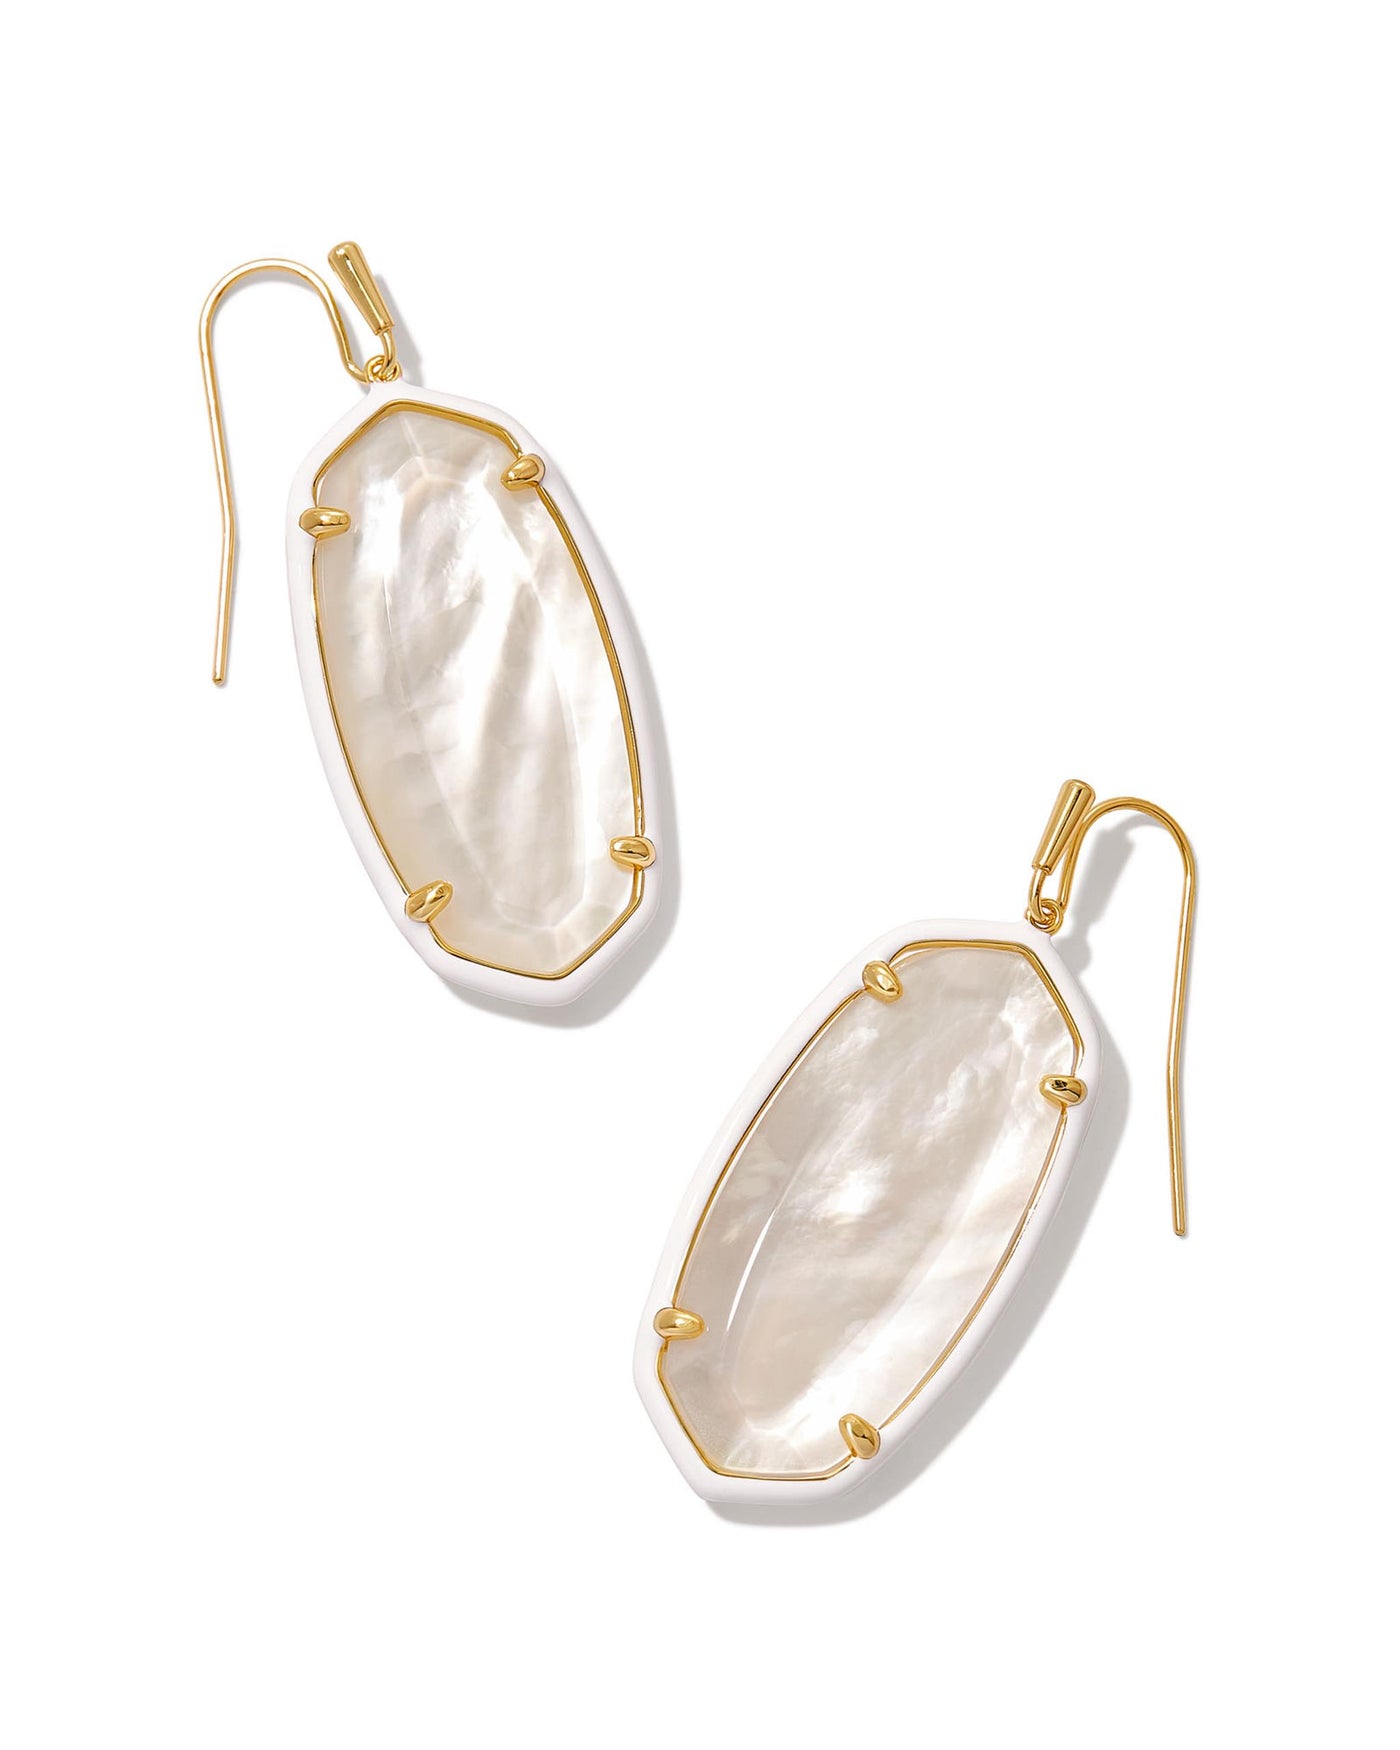 Gold Tone Earrings Featuring Ombre Ivory Mix by Kendra Scott